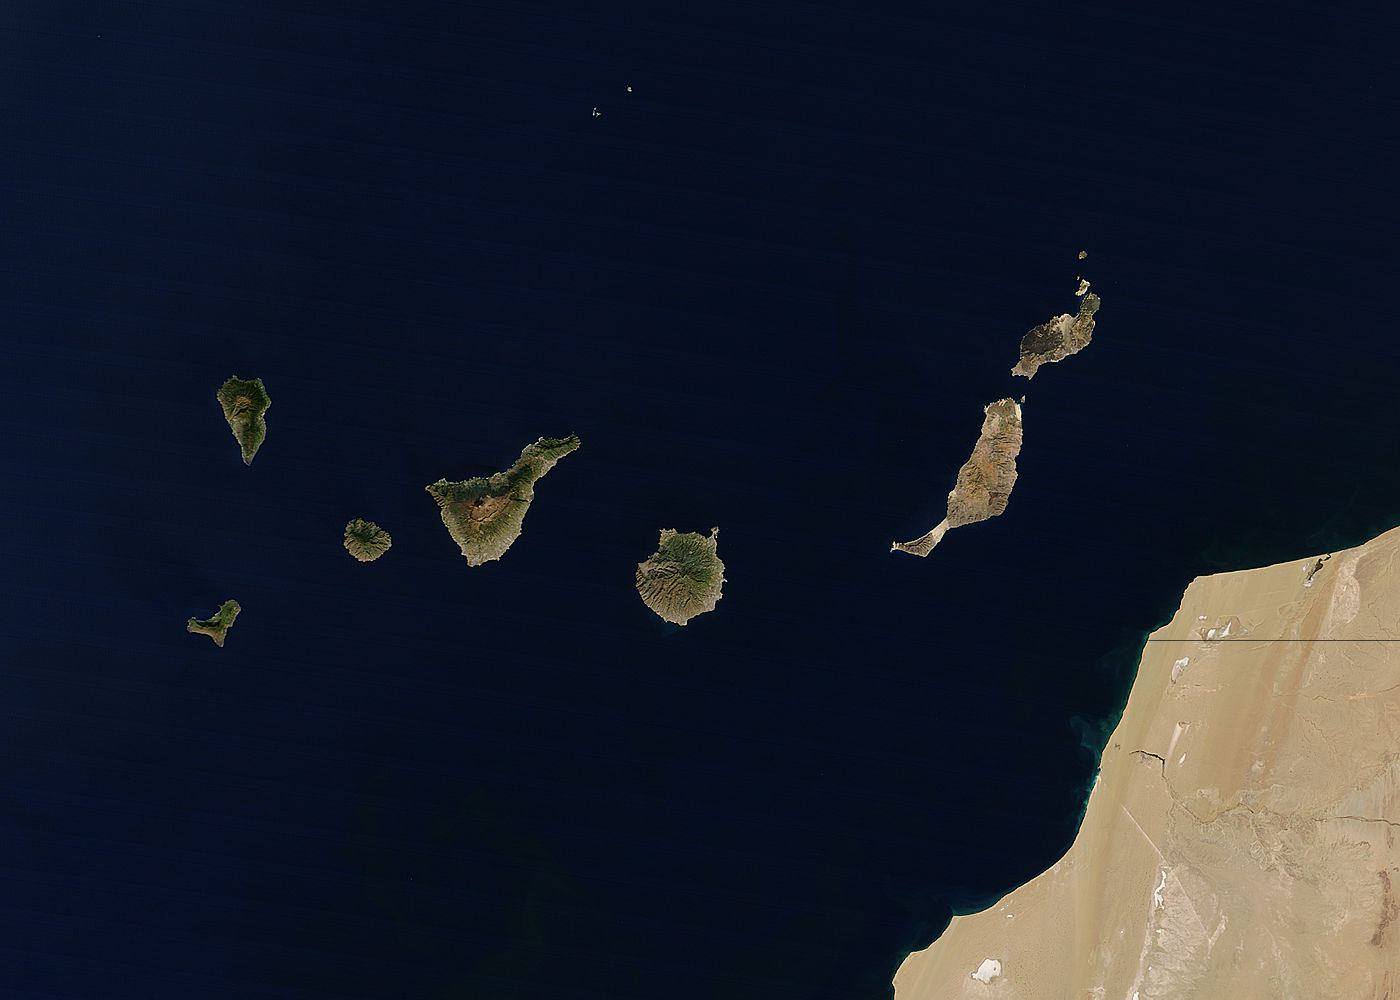 Clear skies over the Canary Islands